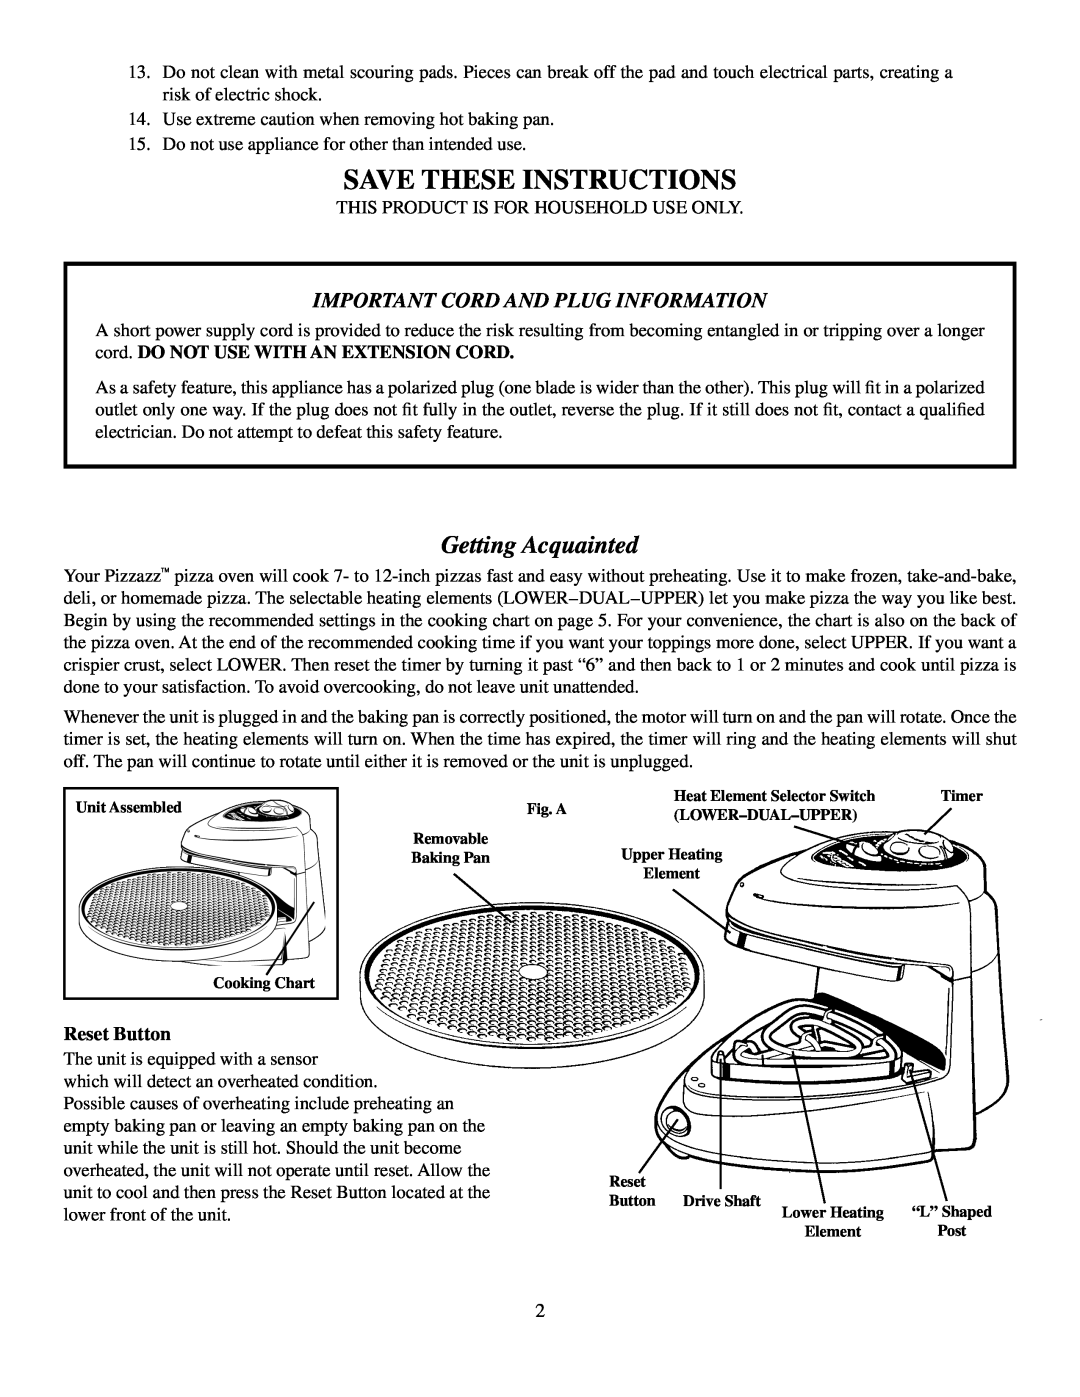 Presto Pizzazz Oven manual Save These Instructions, Getting Acquainted, Reset Button, Important Cord and Plug Information 